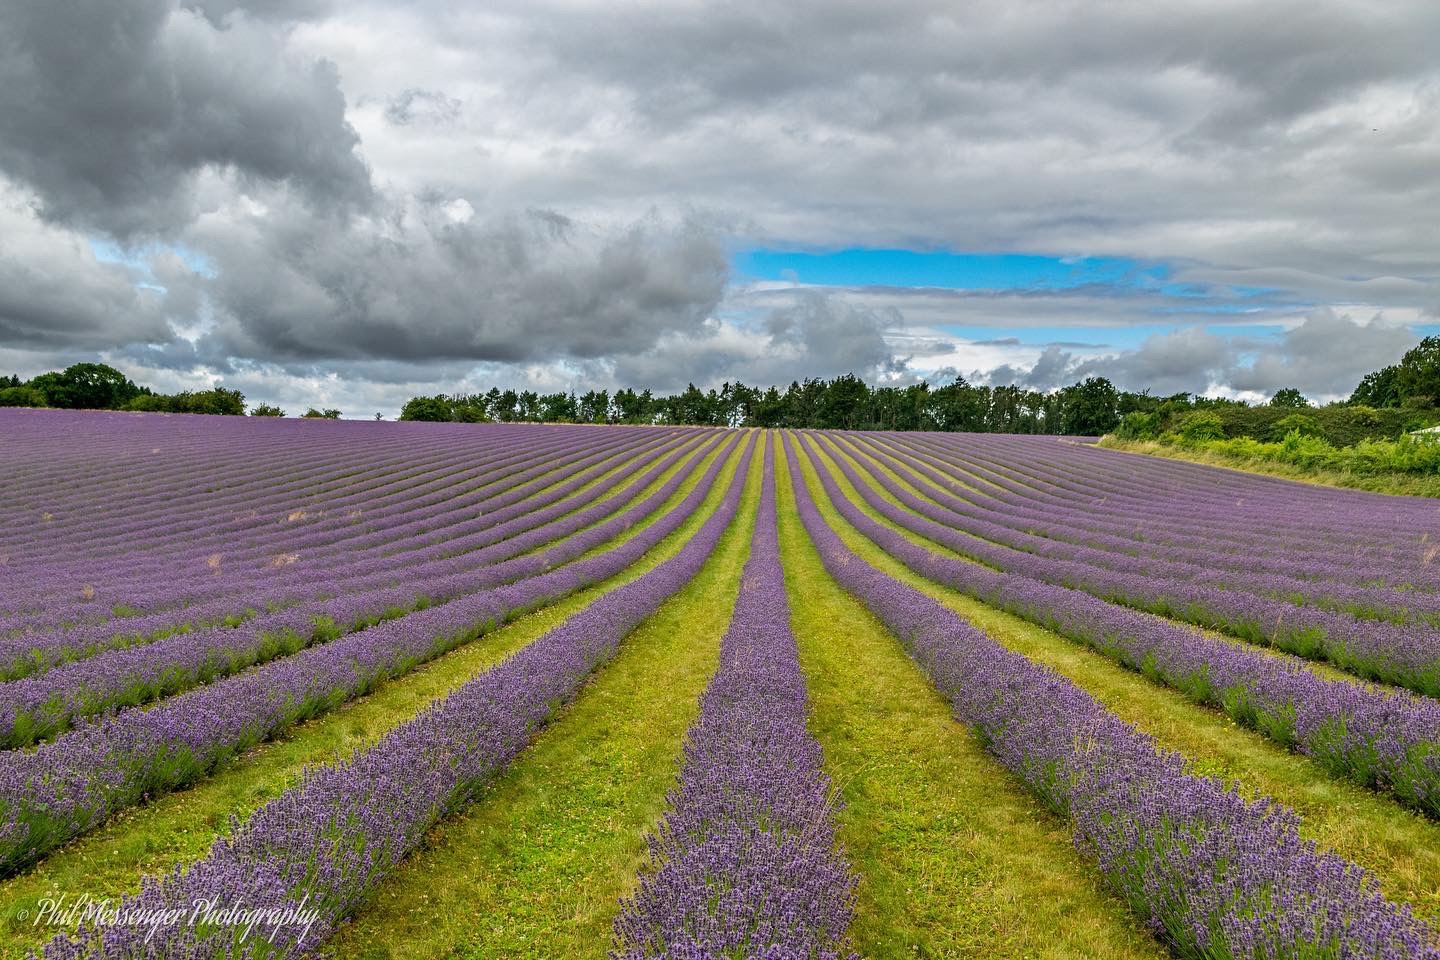 Straight lines and rows at Cotswold Lavender.